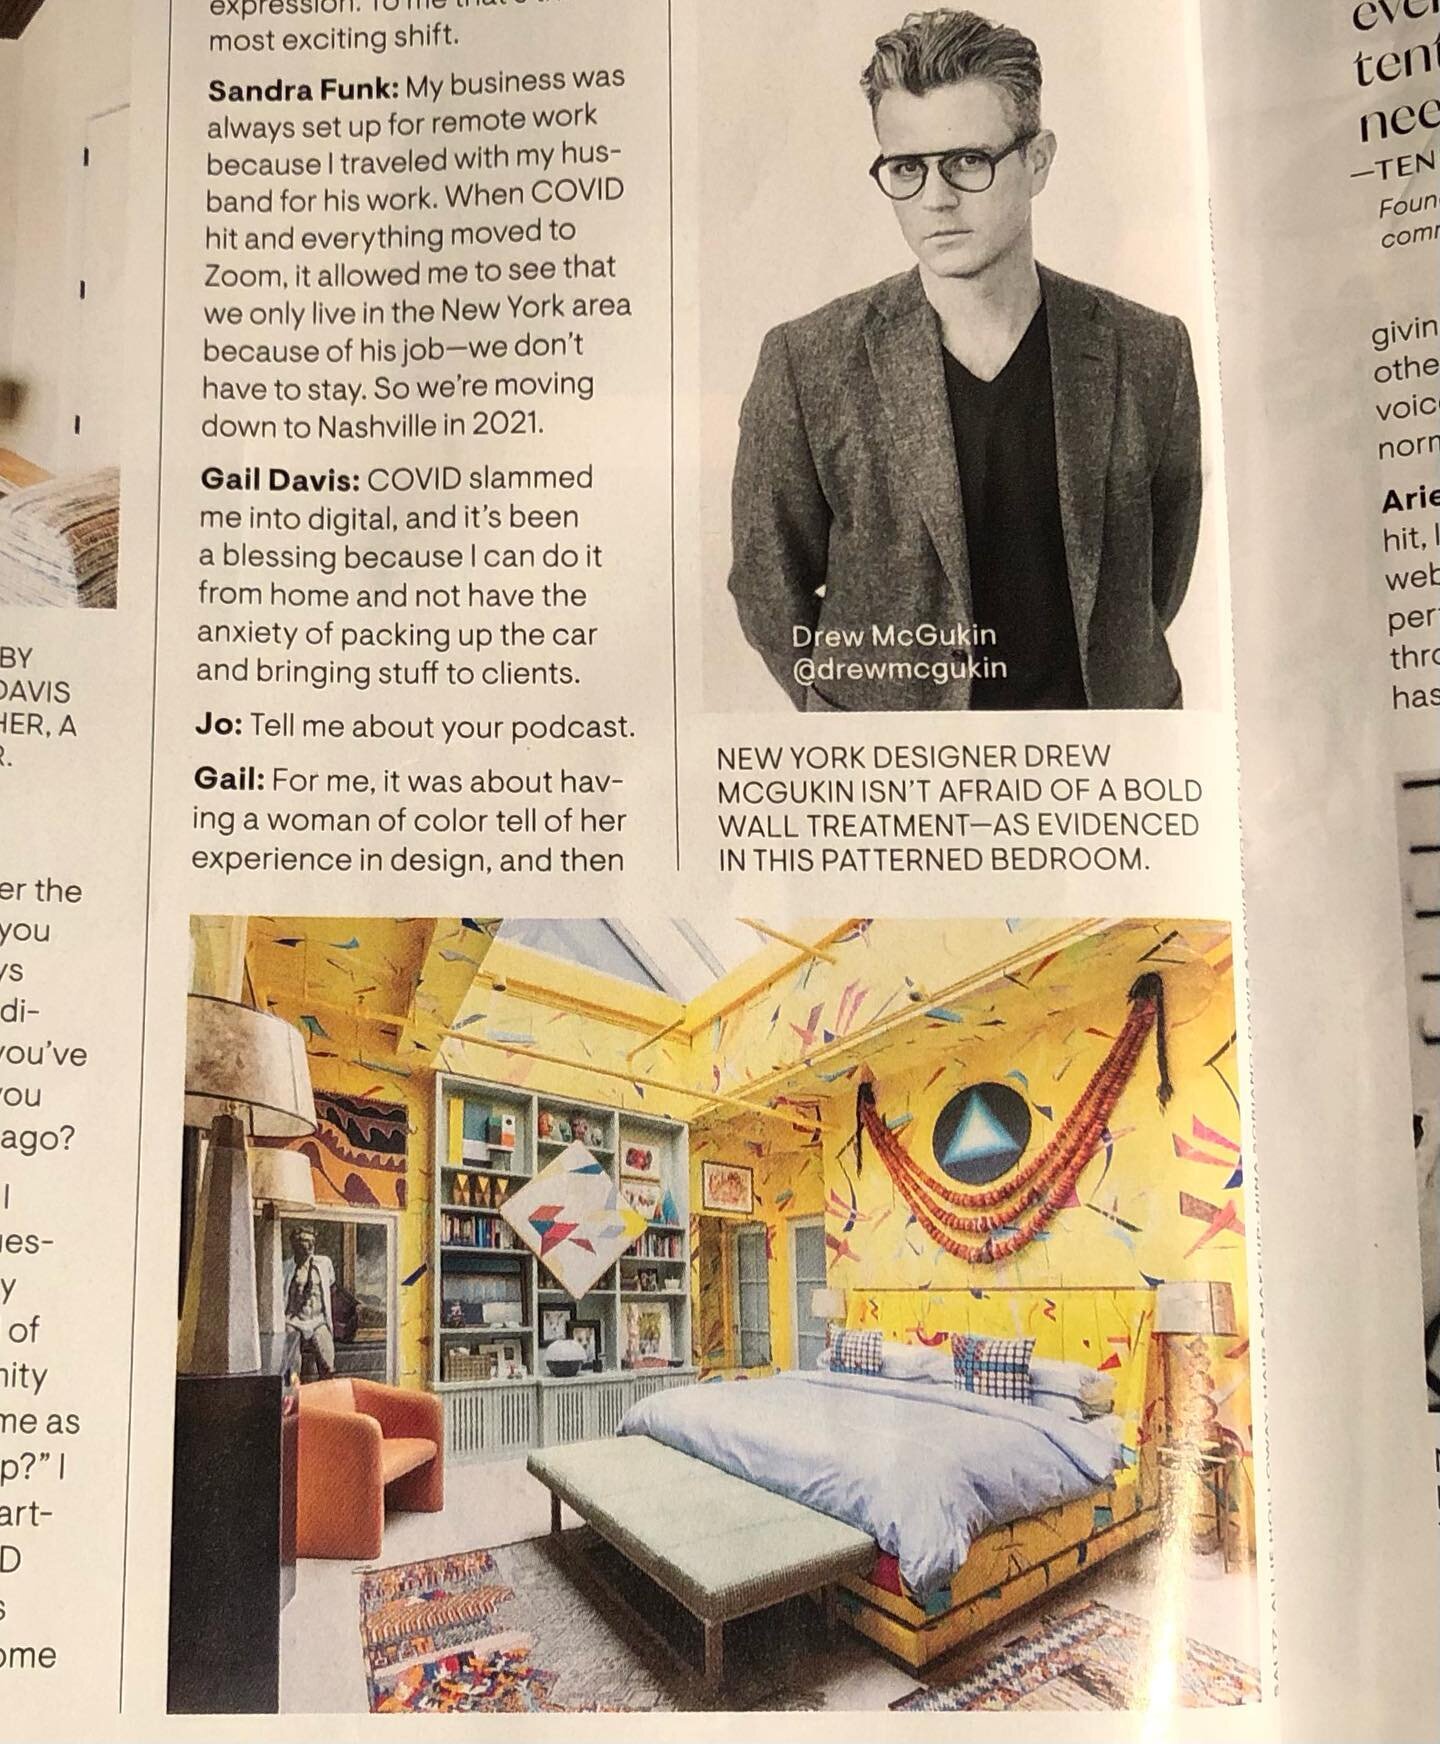 Things are looking up for the end of the year. Election is over, and then I open my latest @housebeautiful  and I&rsquo;m greeted by @drewmcgukin &lsquo;s sweet face . Being greeted by friendly faces is the way I want to wrap up 2020❤️